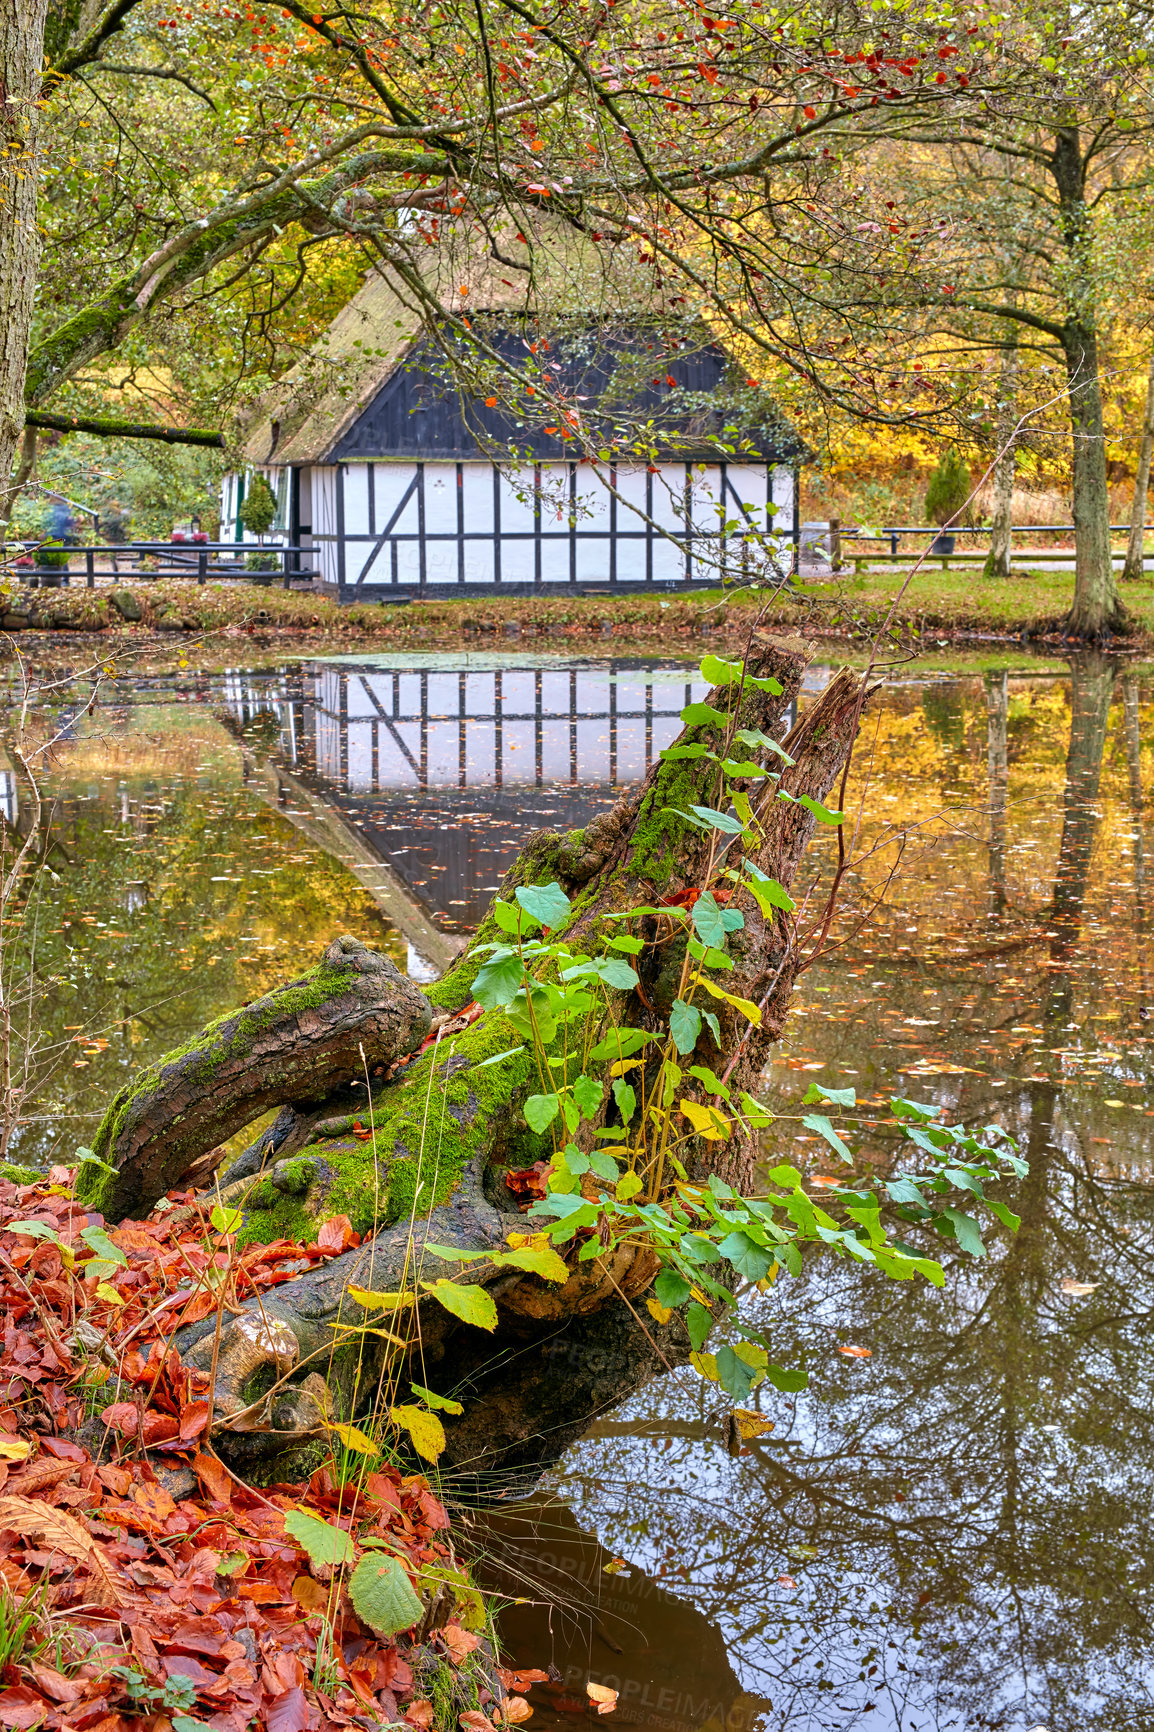 Buy stock photo Beautiful park with a lake during autumn with yellow leaves and plants outdoors in nature. Children's house near bright and vibrant foliage reflected in pond water in a peaceful location